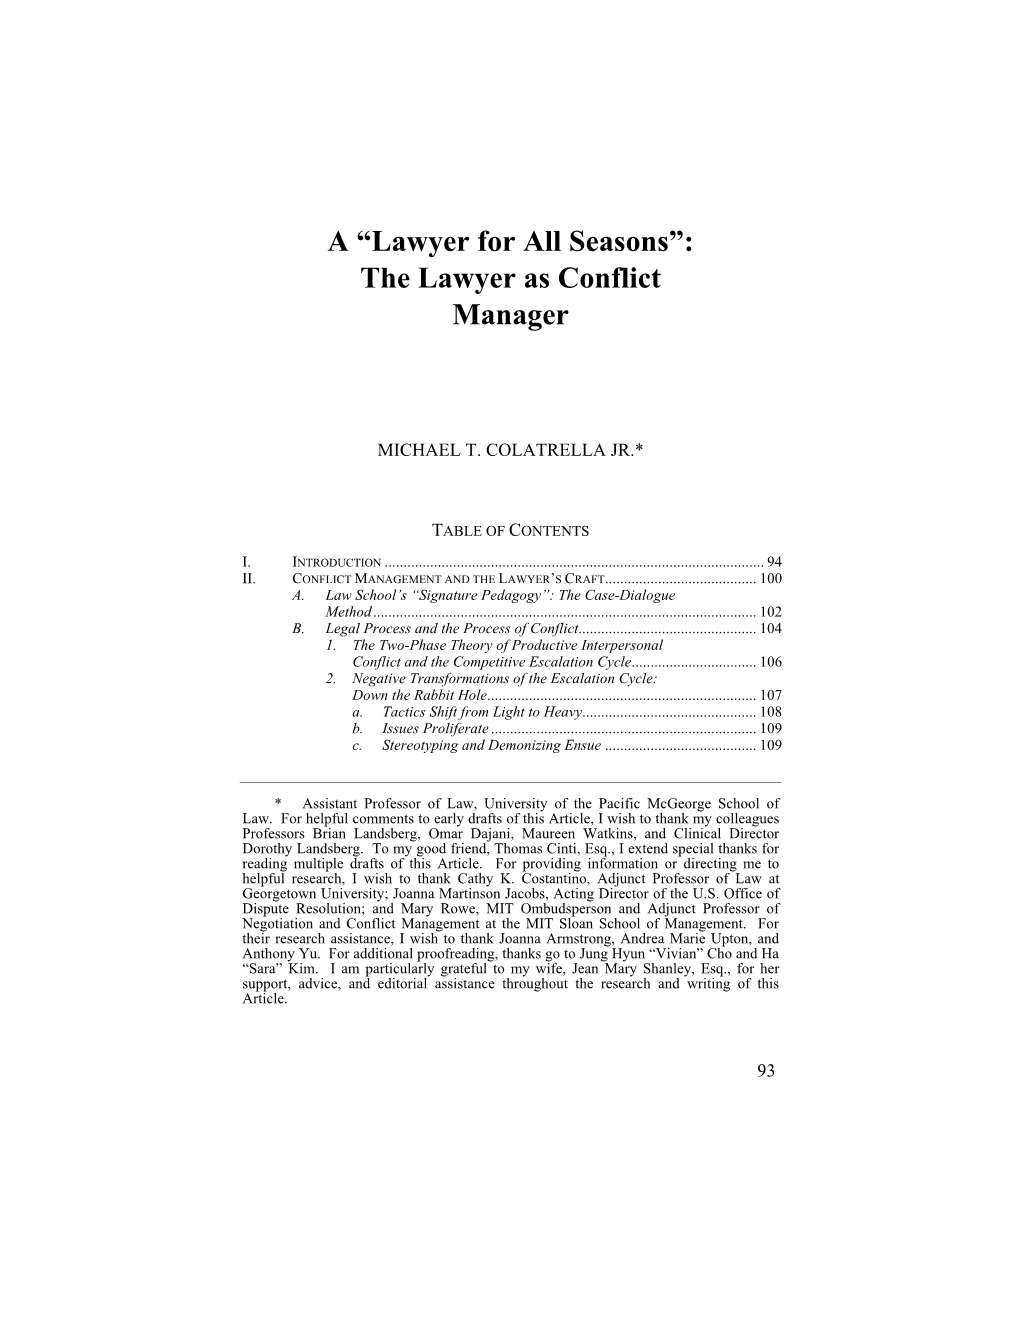 A "Lawyer for All Seasons": the Lawyer As Conflict Manager